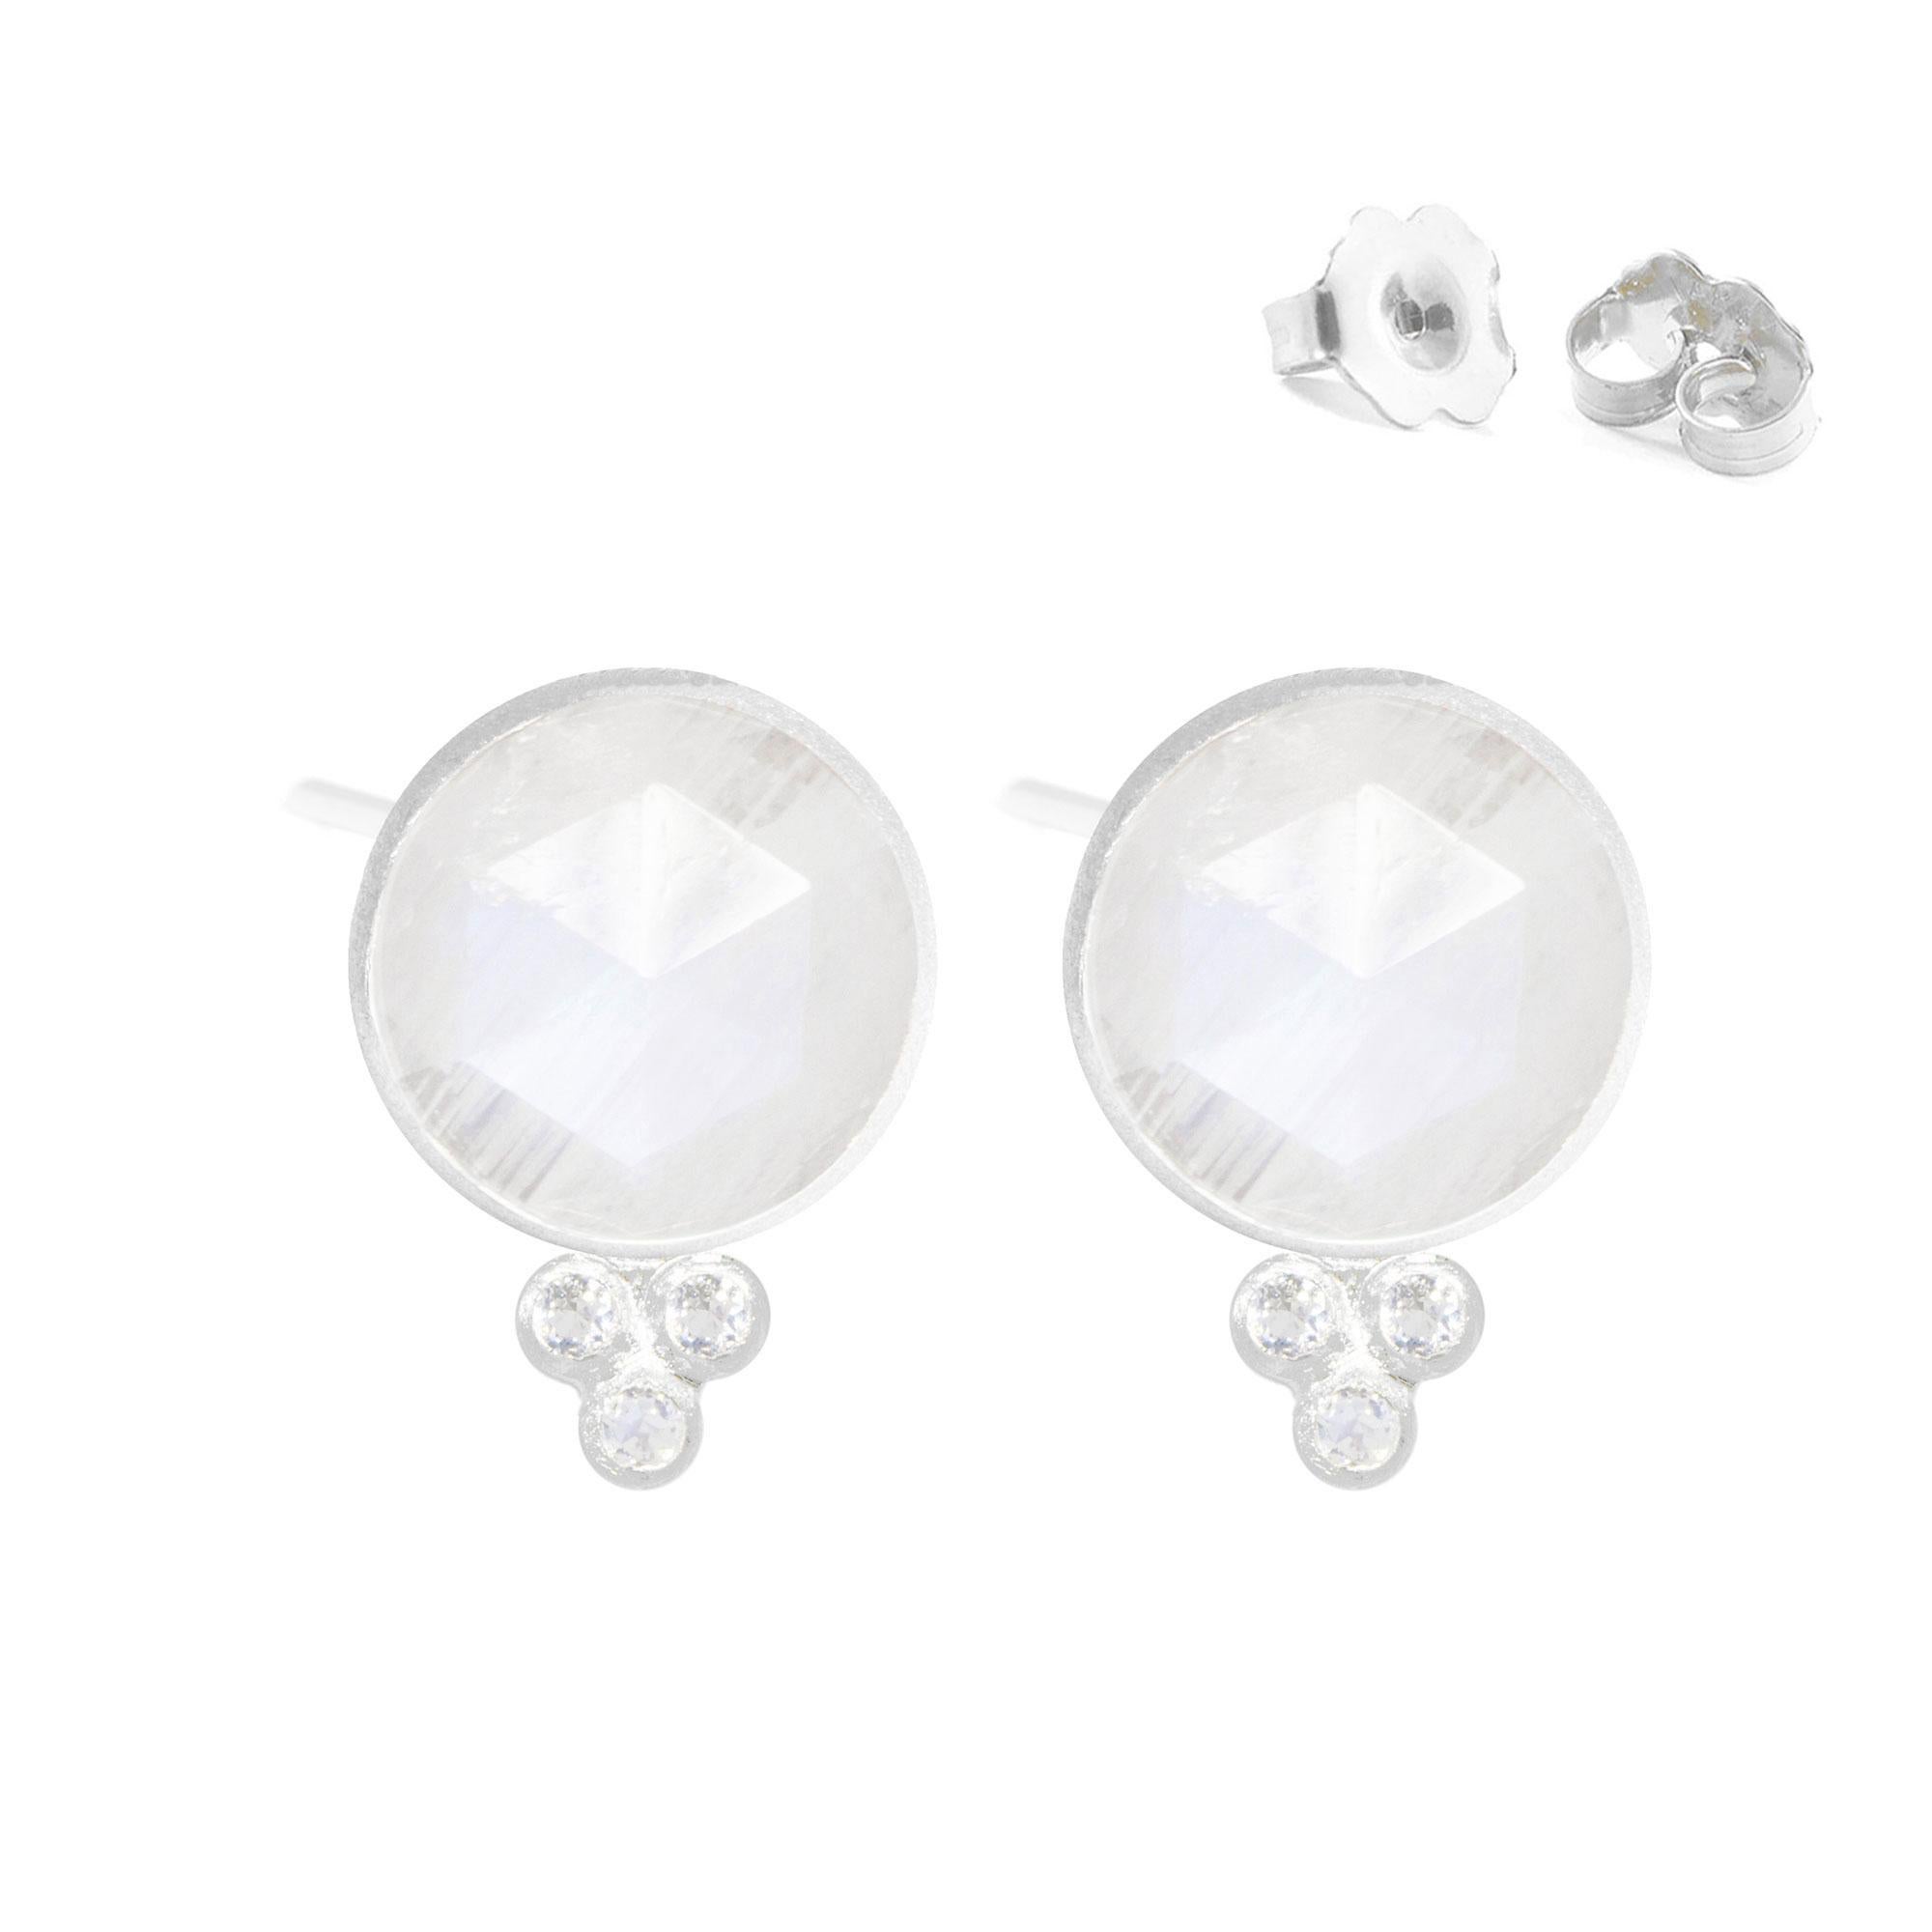 A Nina Nguyen classic: Our Chloe Silver Studs are designed with faceted moonstones rimmed in silver, and accented with gemstones for some extra sparkle.
Nina Nguyen Design's patent-pending earrings have an element on the back of the stud or charm to